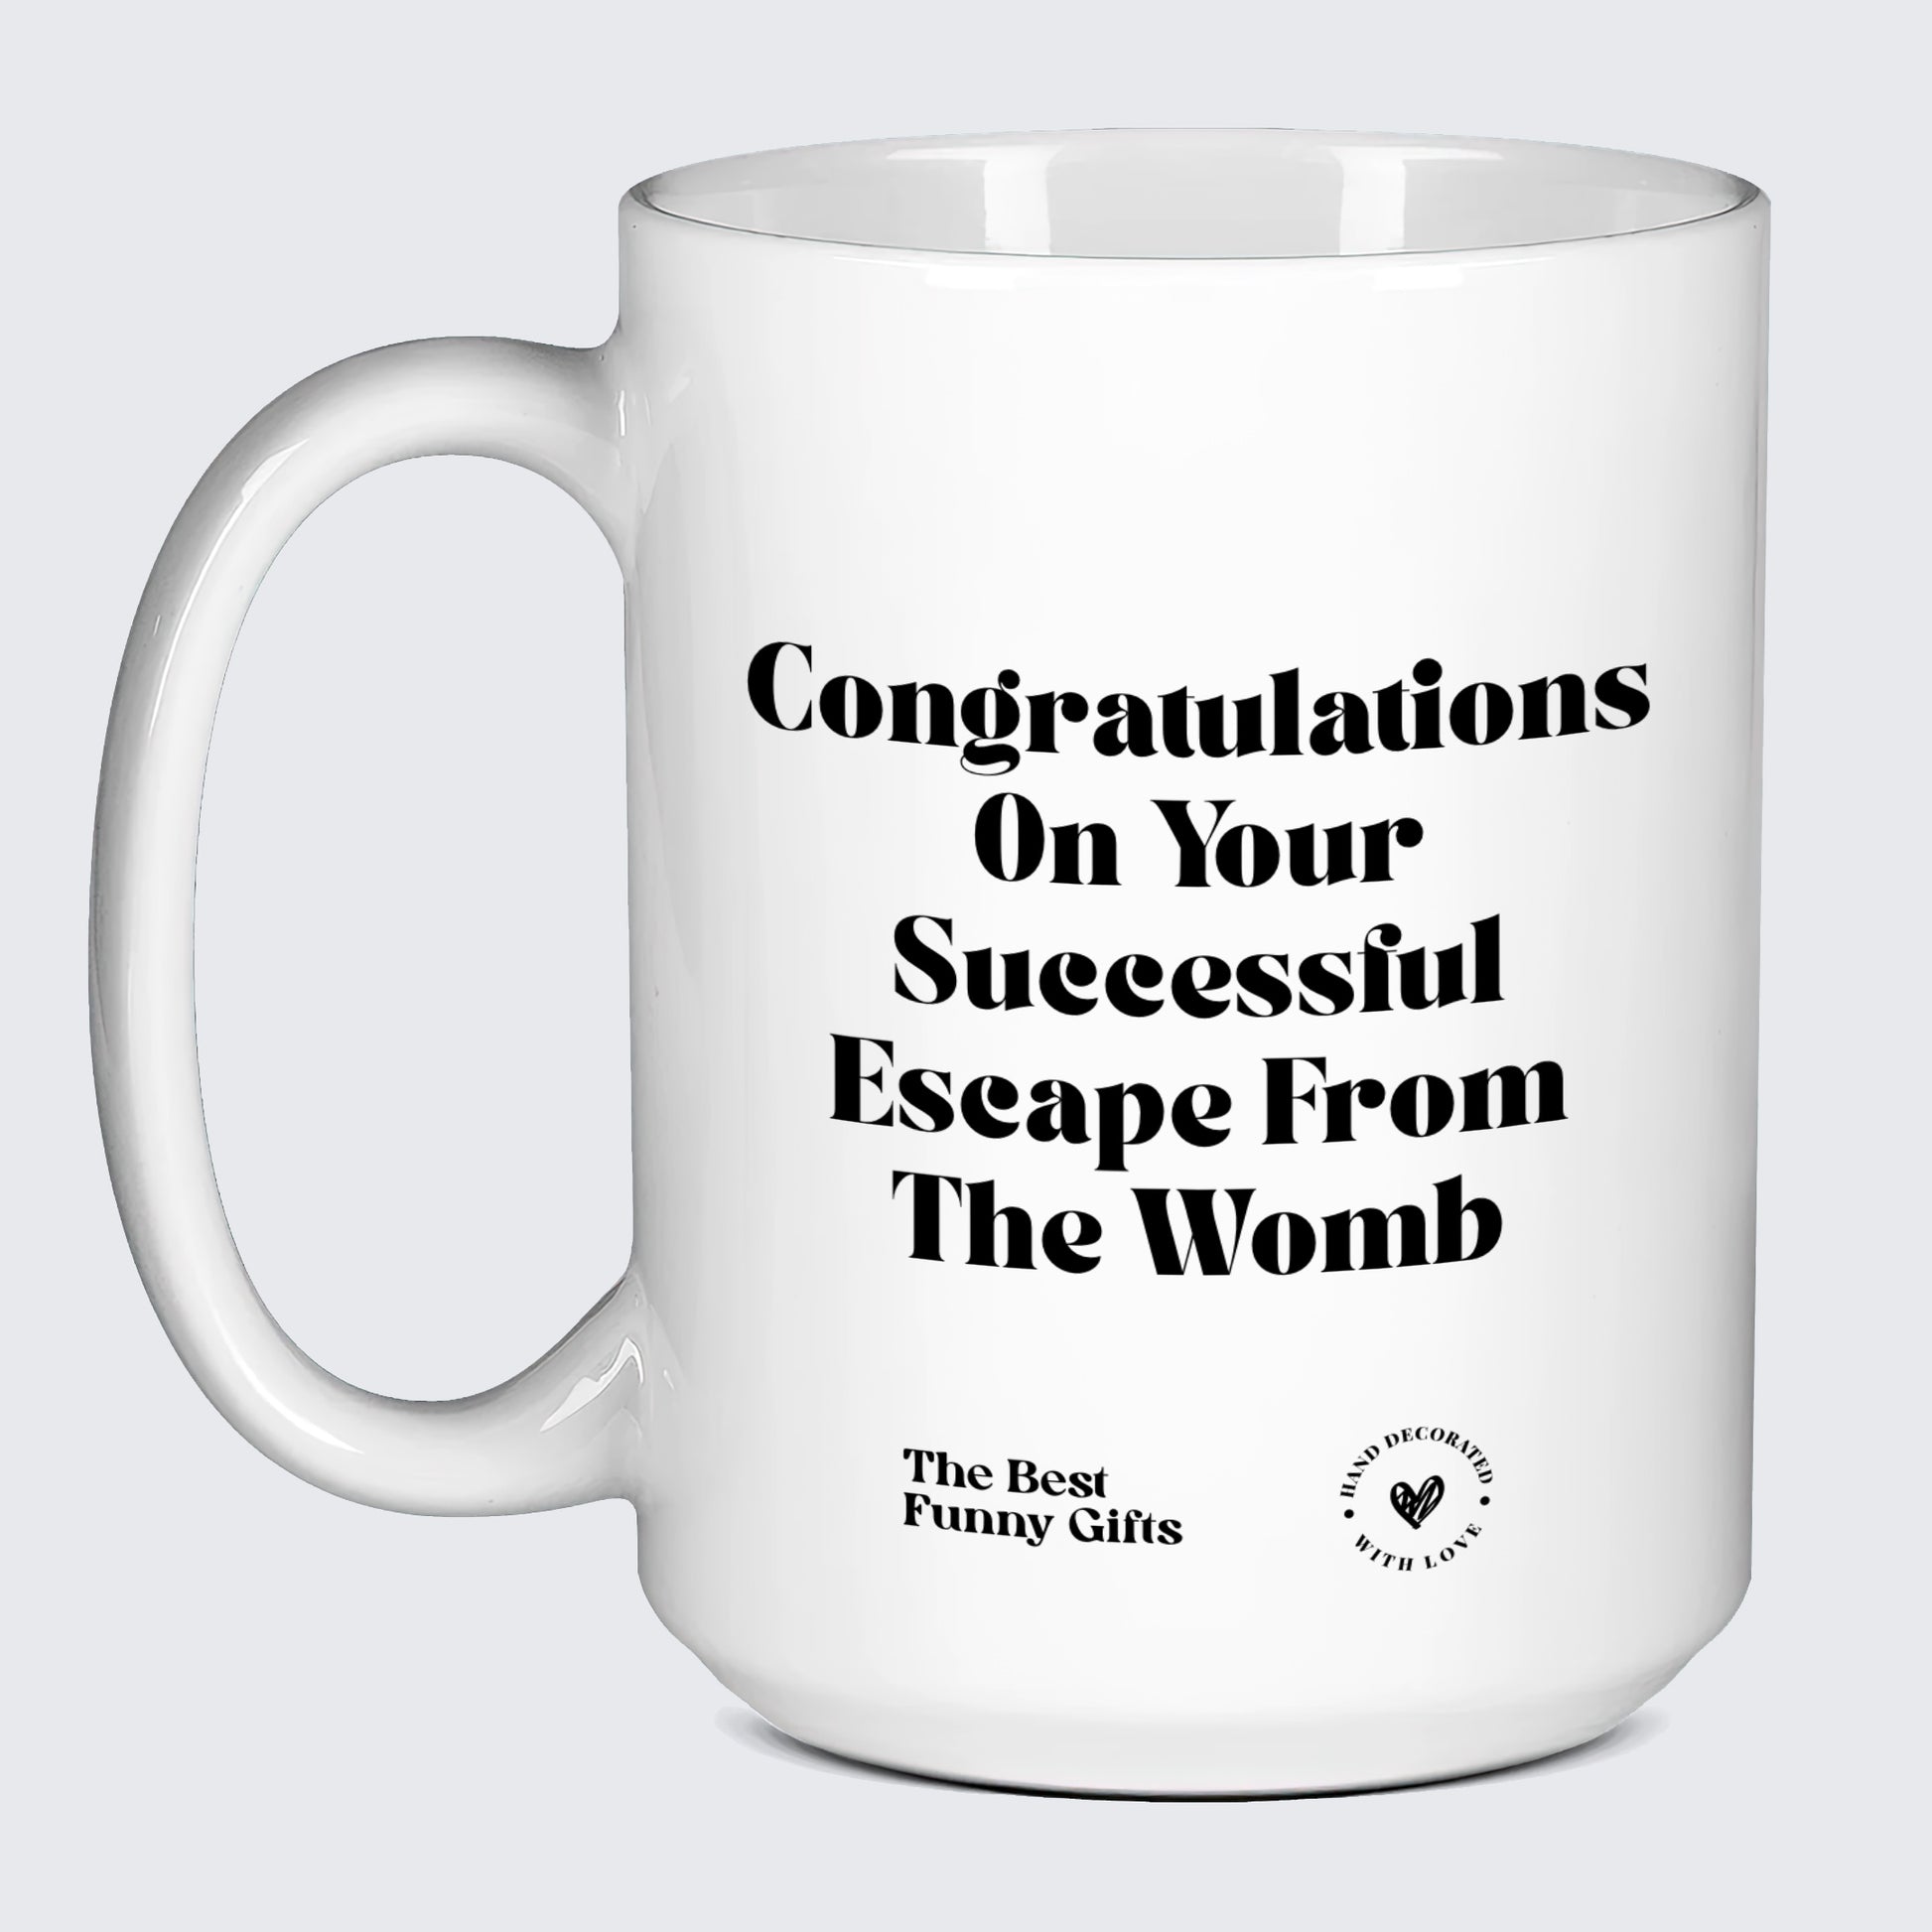 Birthday Gift Congratulations on Your Successful Escape From the Womb - The Best Funny Gifts